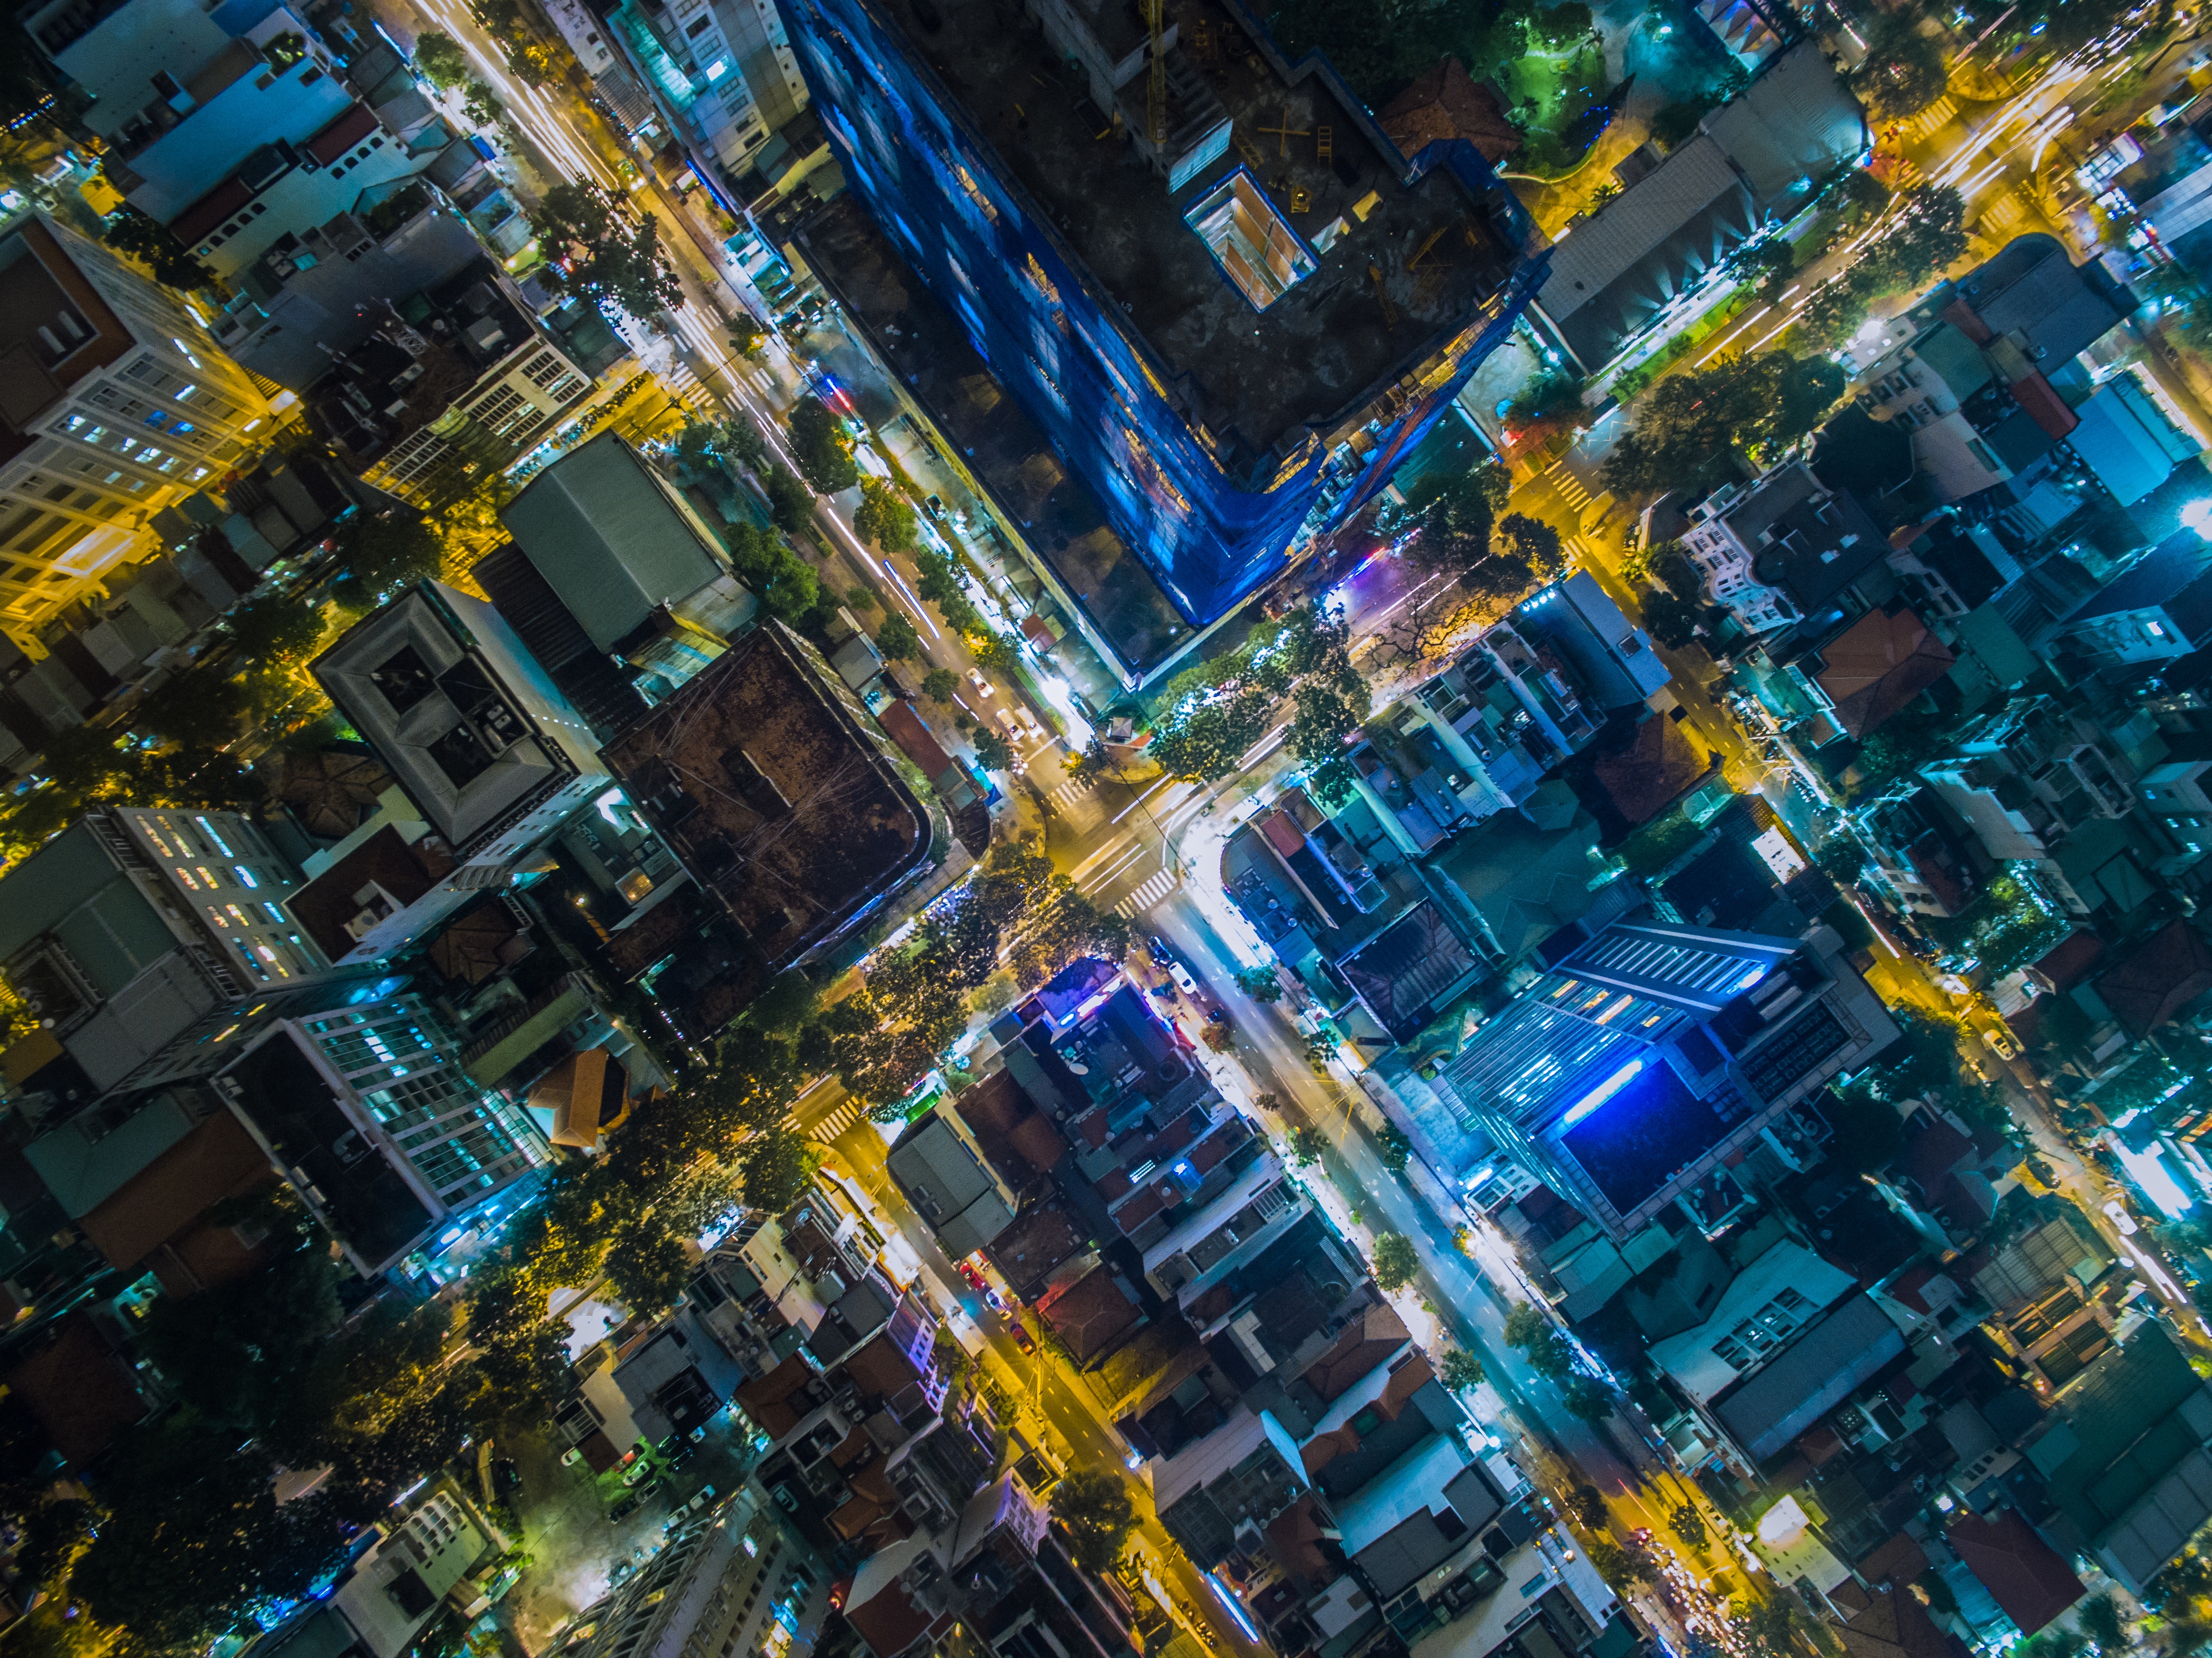 image of Ho Chi Minh city from above at night